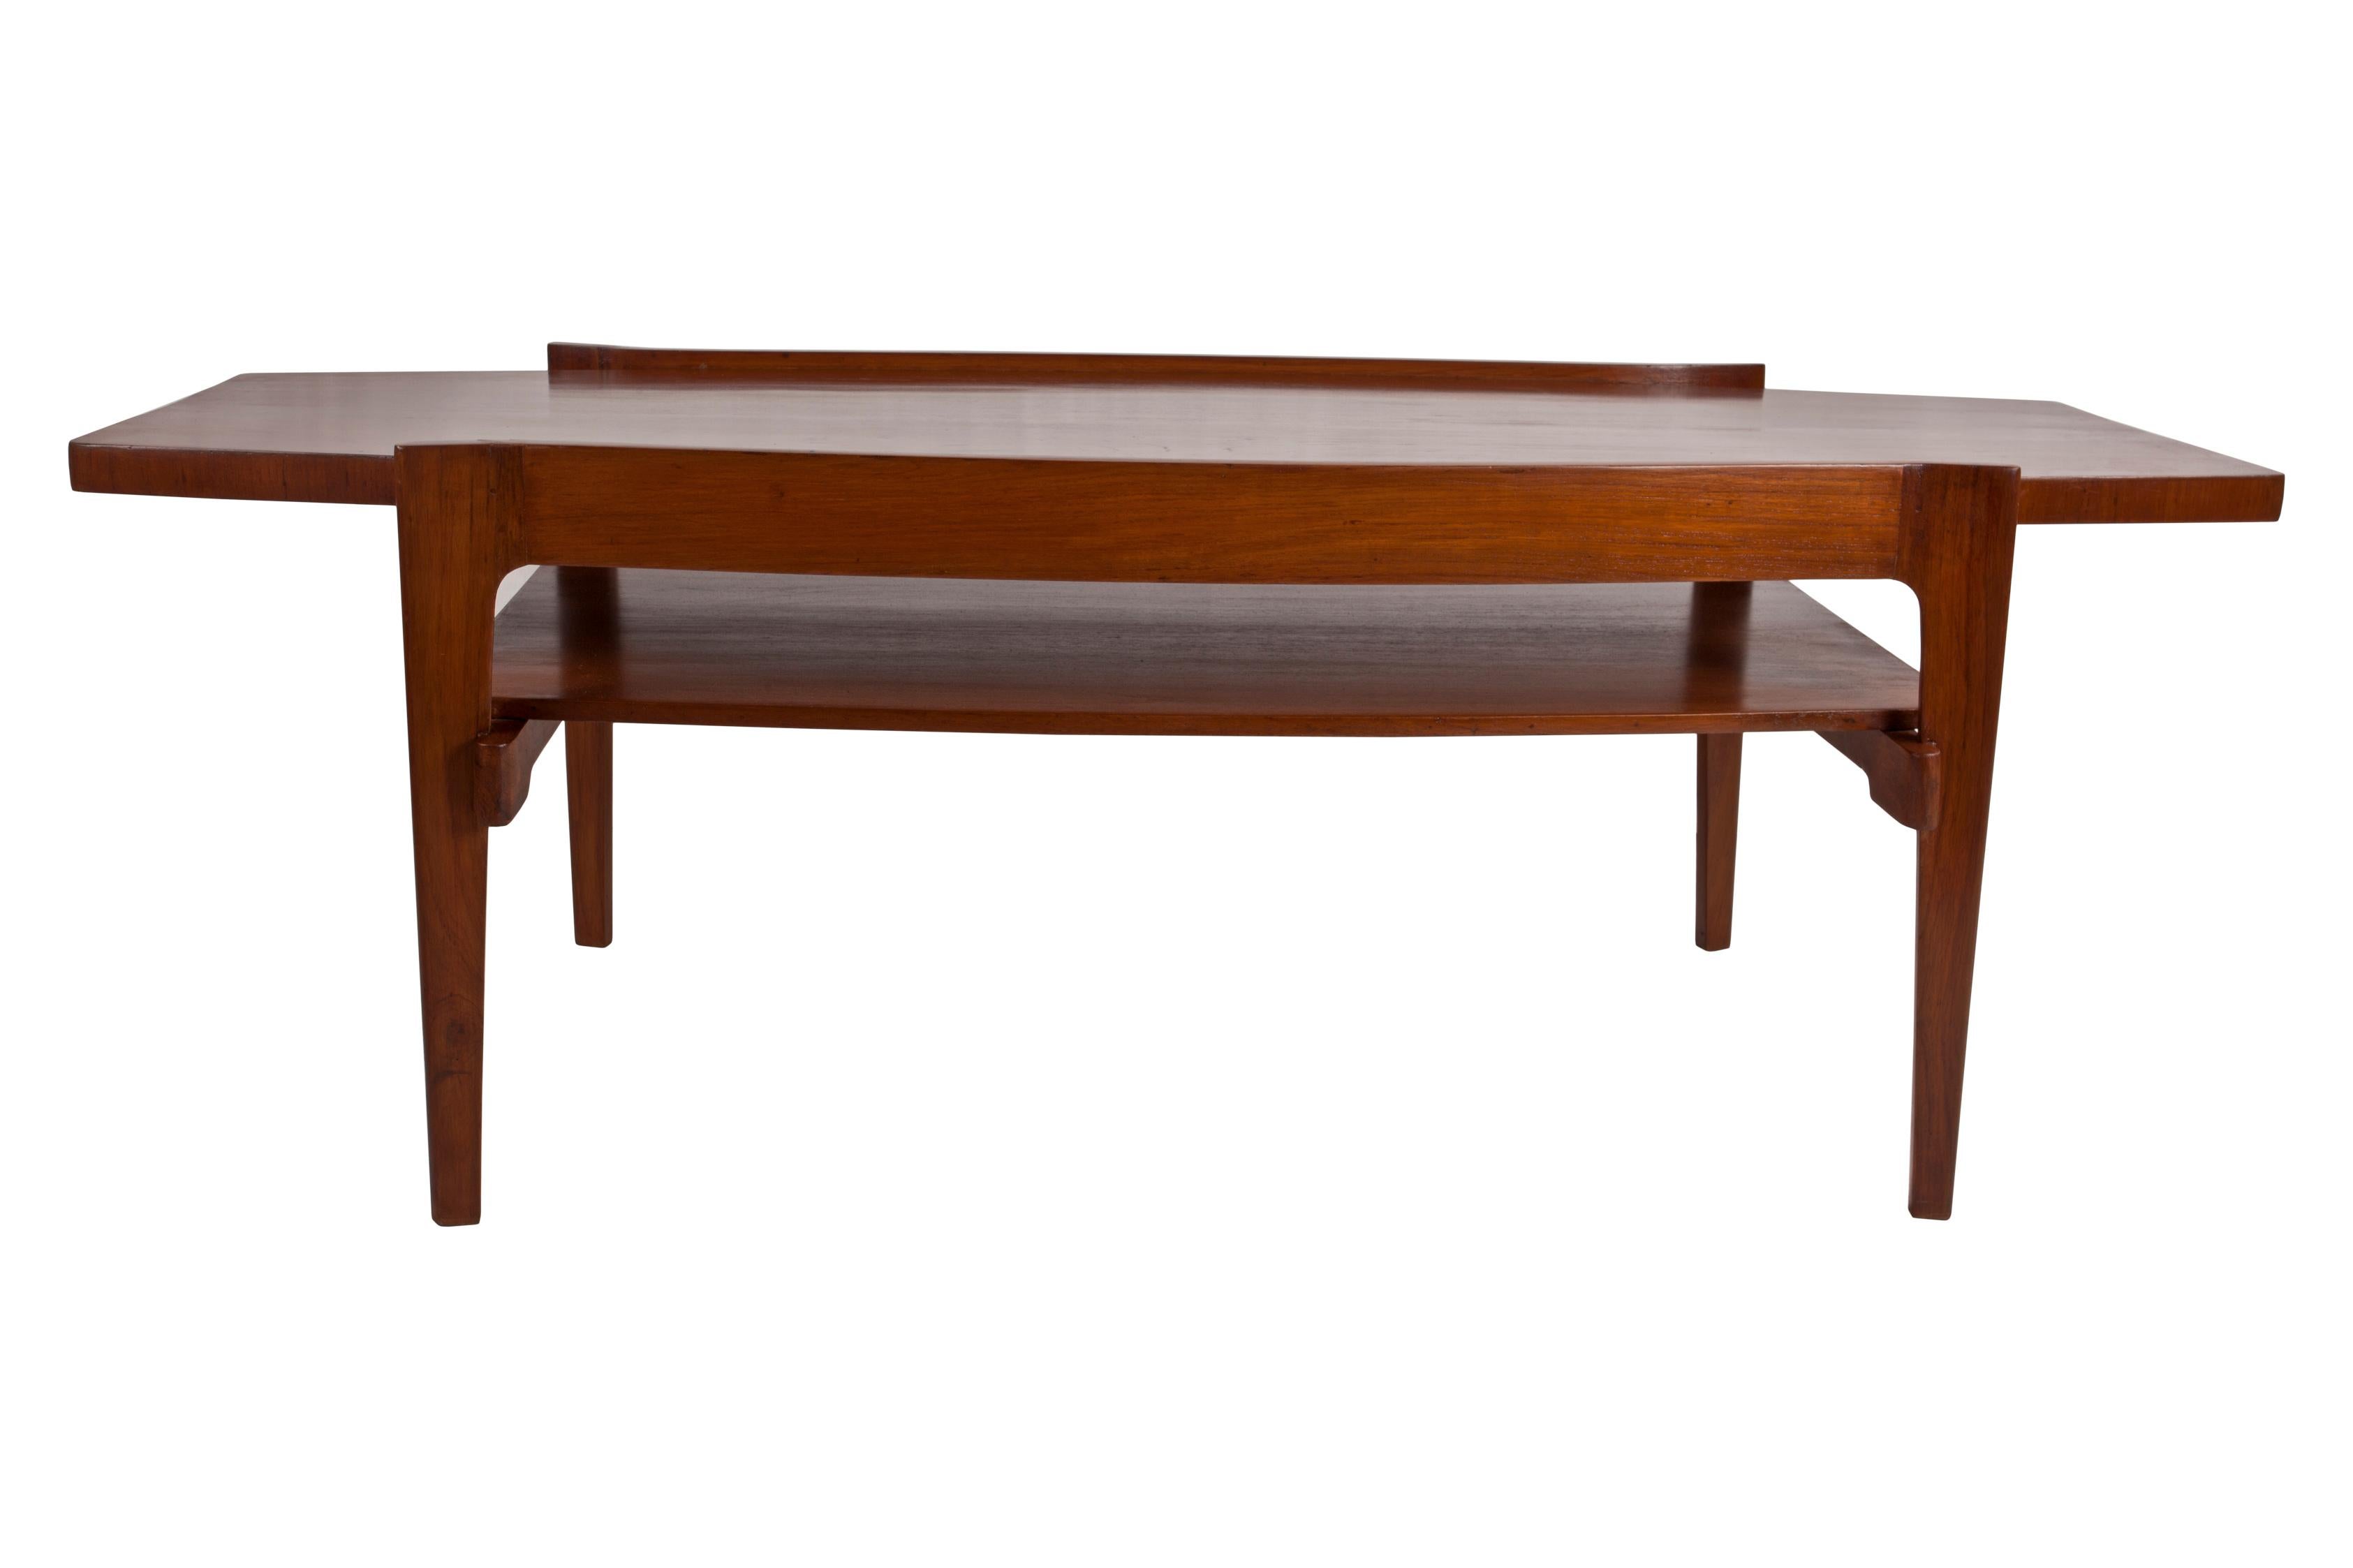 Mid-Century Modern teak coffee table, Danish. Lower shelf, tapered top and flared edges. Distance between the shelf and the top is 4 inches.